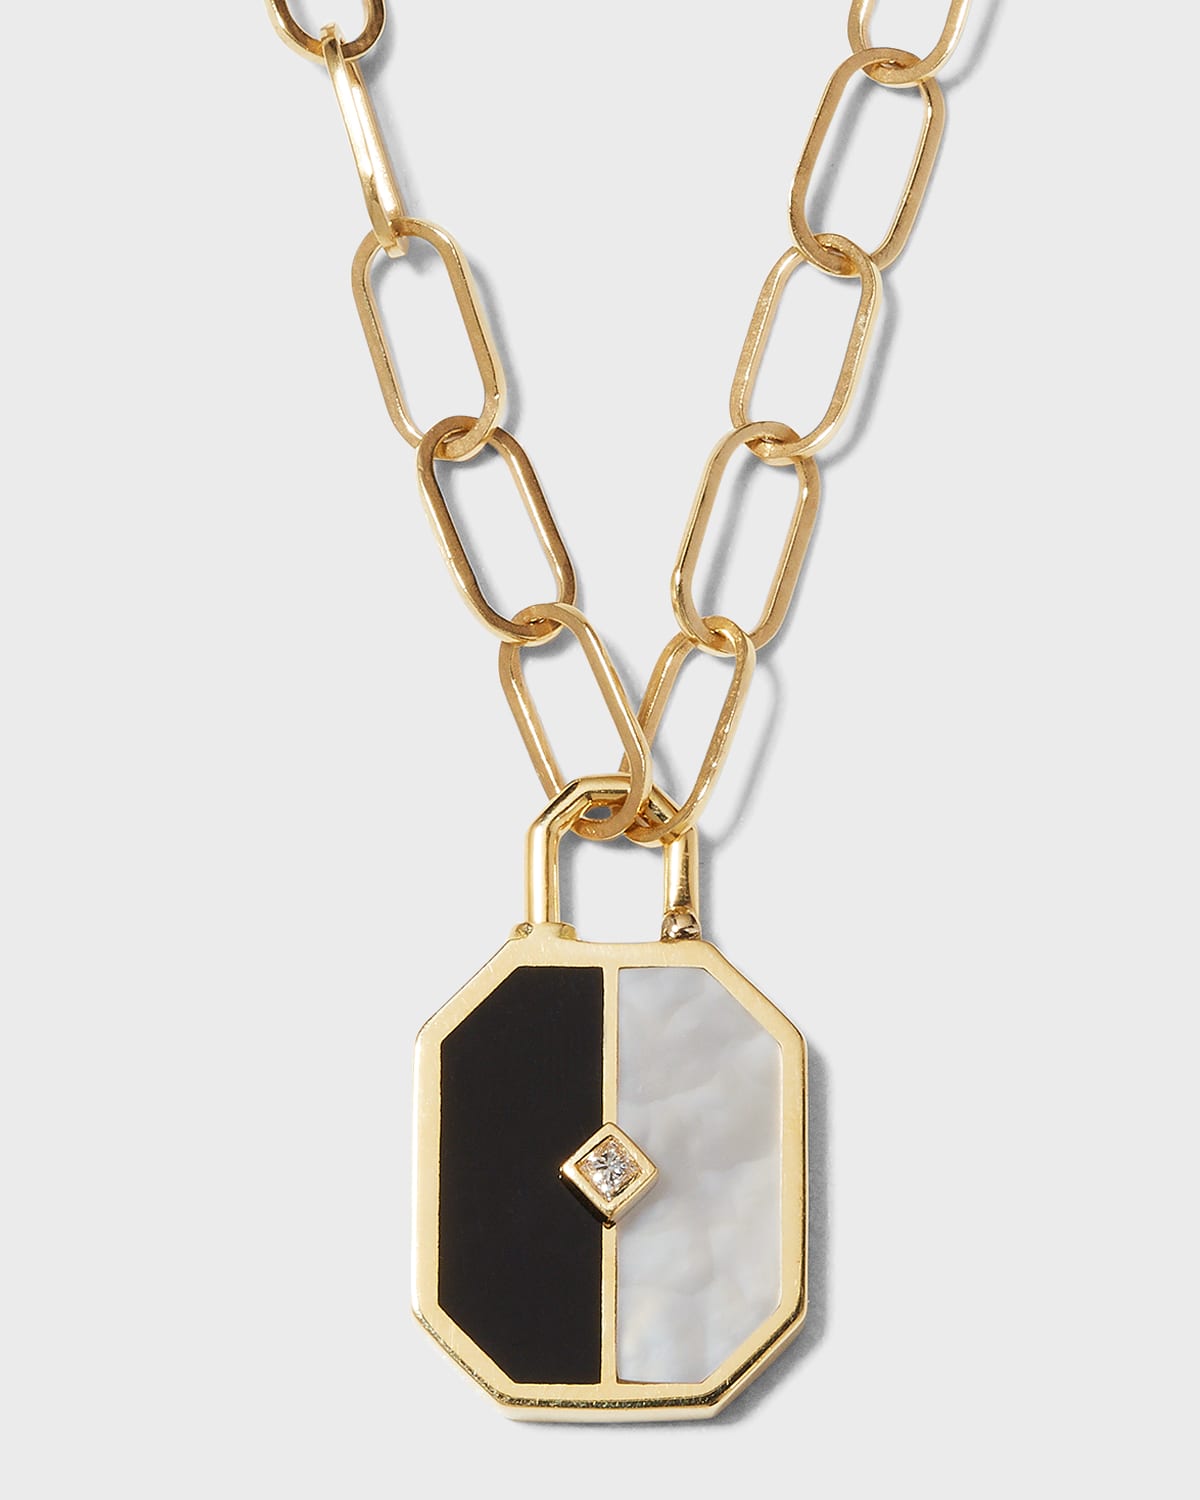 L'atelier Nawbar Lock'In Love Pendant Necklace with Black Onyx and White Mother-of-Pearl